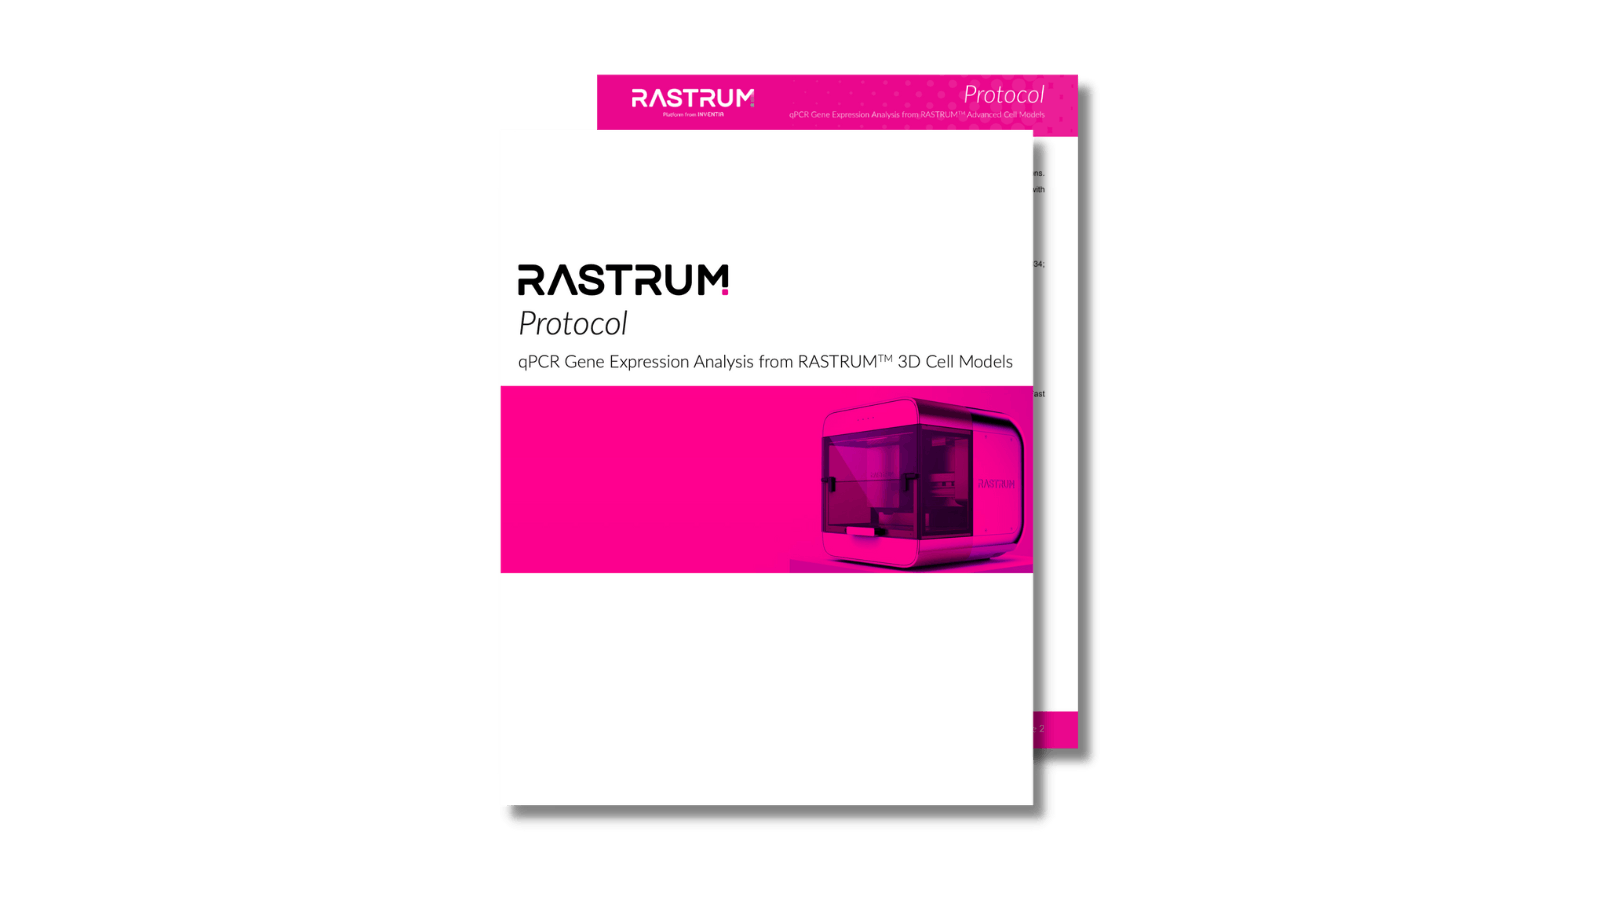 qPCR gene expression analysis from RASTRUM™ Advanced Cell Models